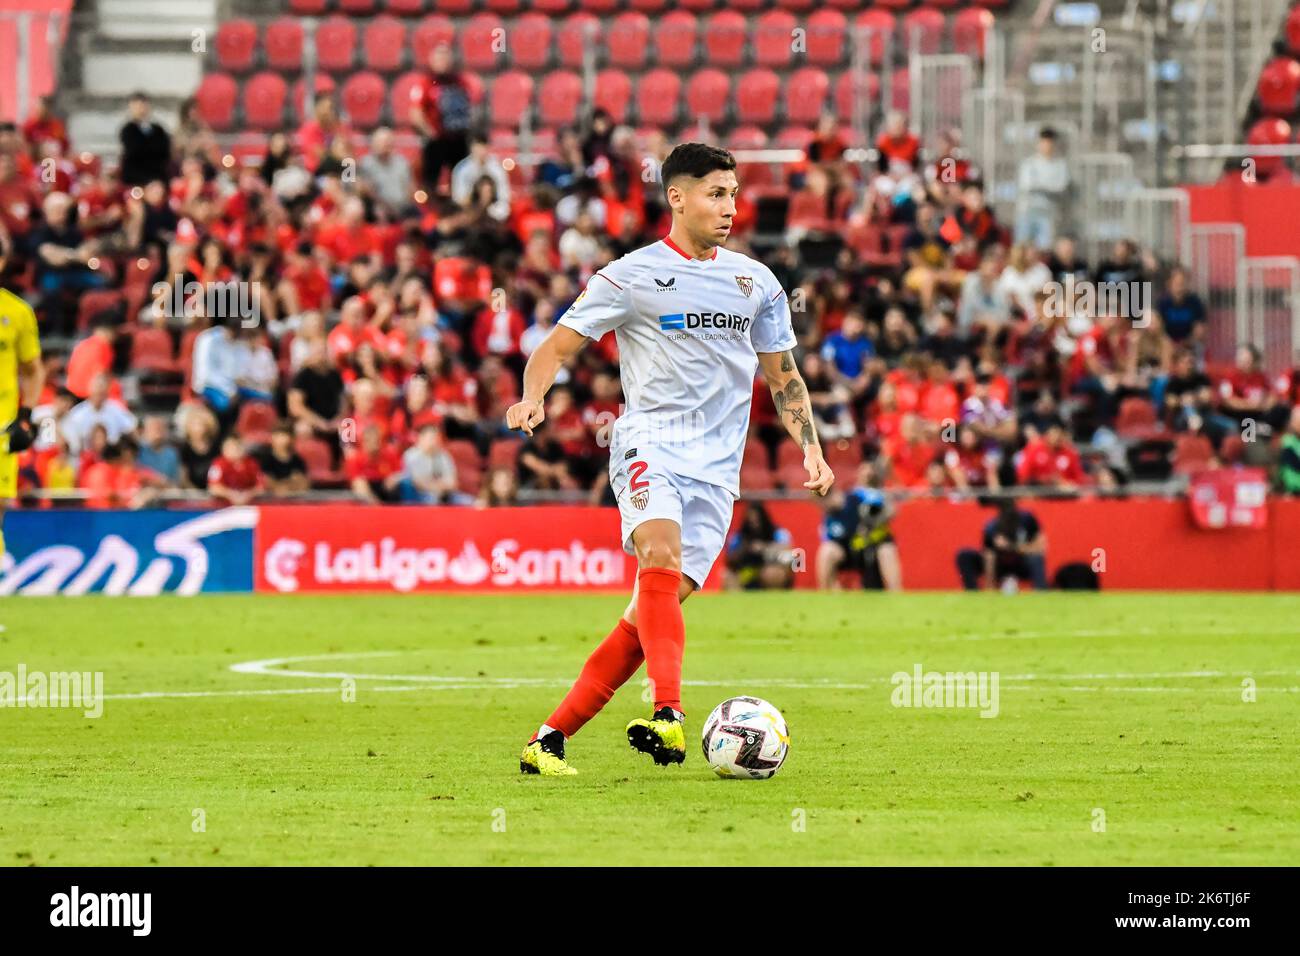 MALLORCA, SPAIN - OCTOBER 15: Gonzalo Montiel of Sevilla CF controls the ball during the match between RCD Mallorca and Sevilla CF of La Liga Santander on October 15, 2022 at Son Moix Stadium of Mallorca, Spain. (Photo by Samuel Carreño/PxImages) Credit: Px Images/Alamy Live News Stock Photo